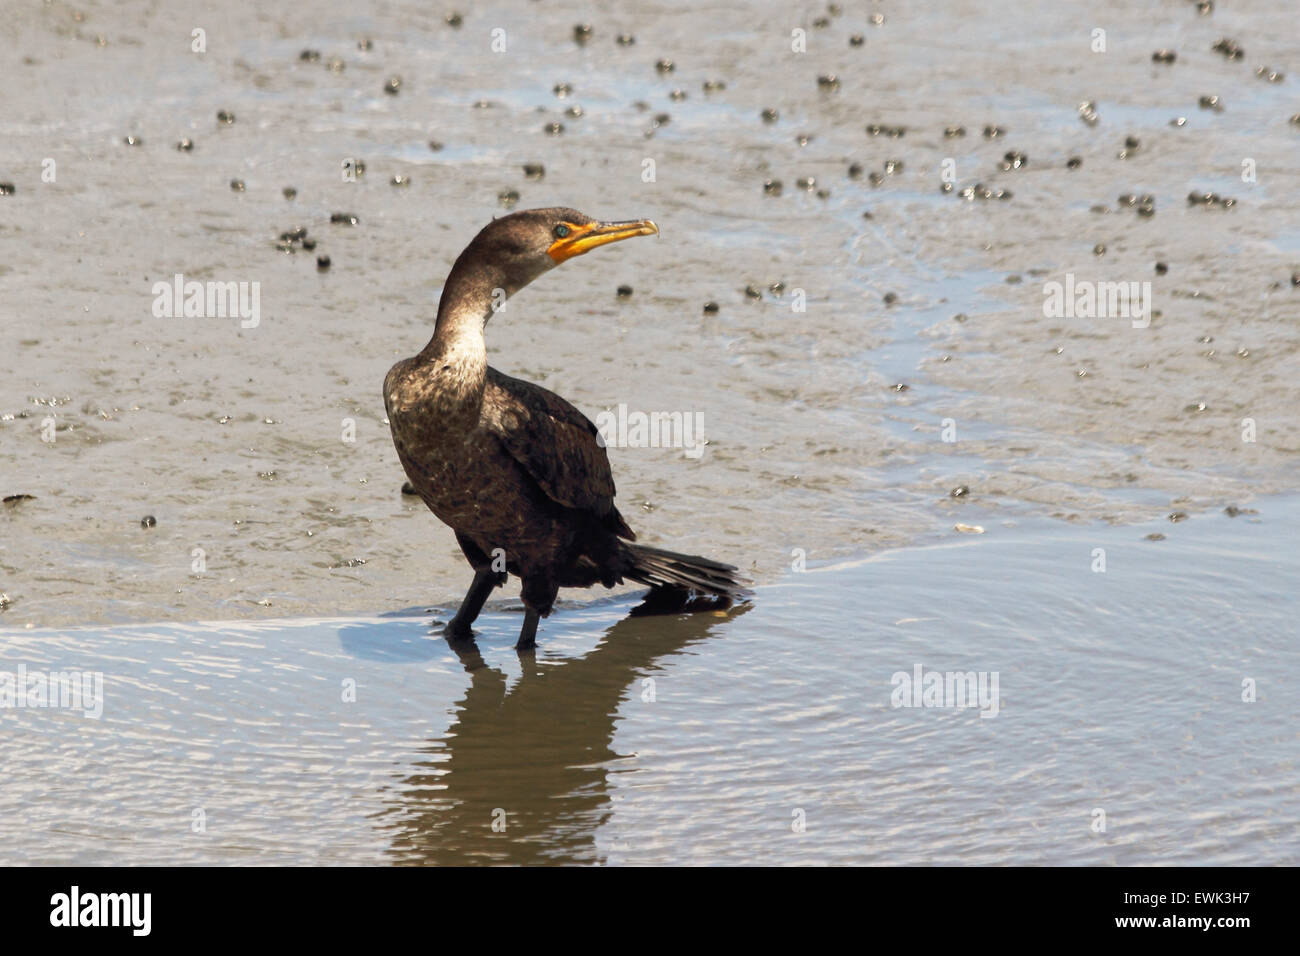 A Double-crested cormorant at the waters edge. Stock Photo